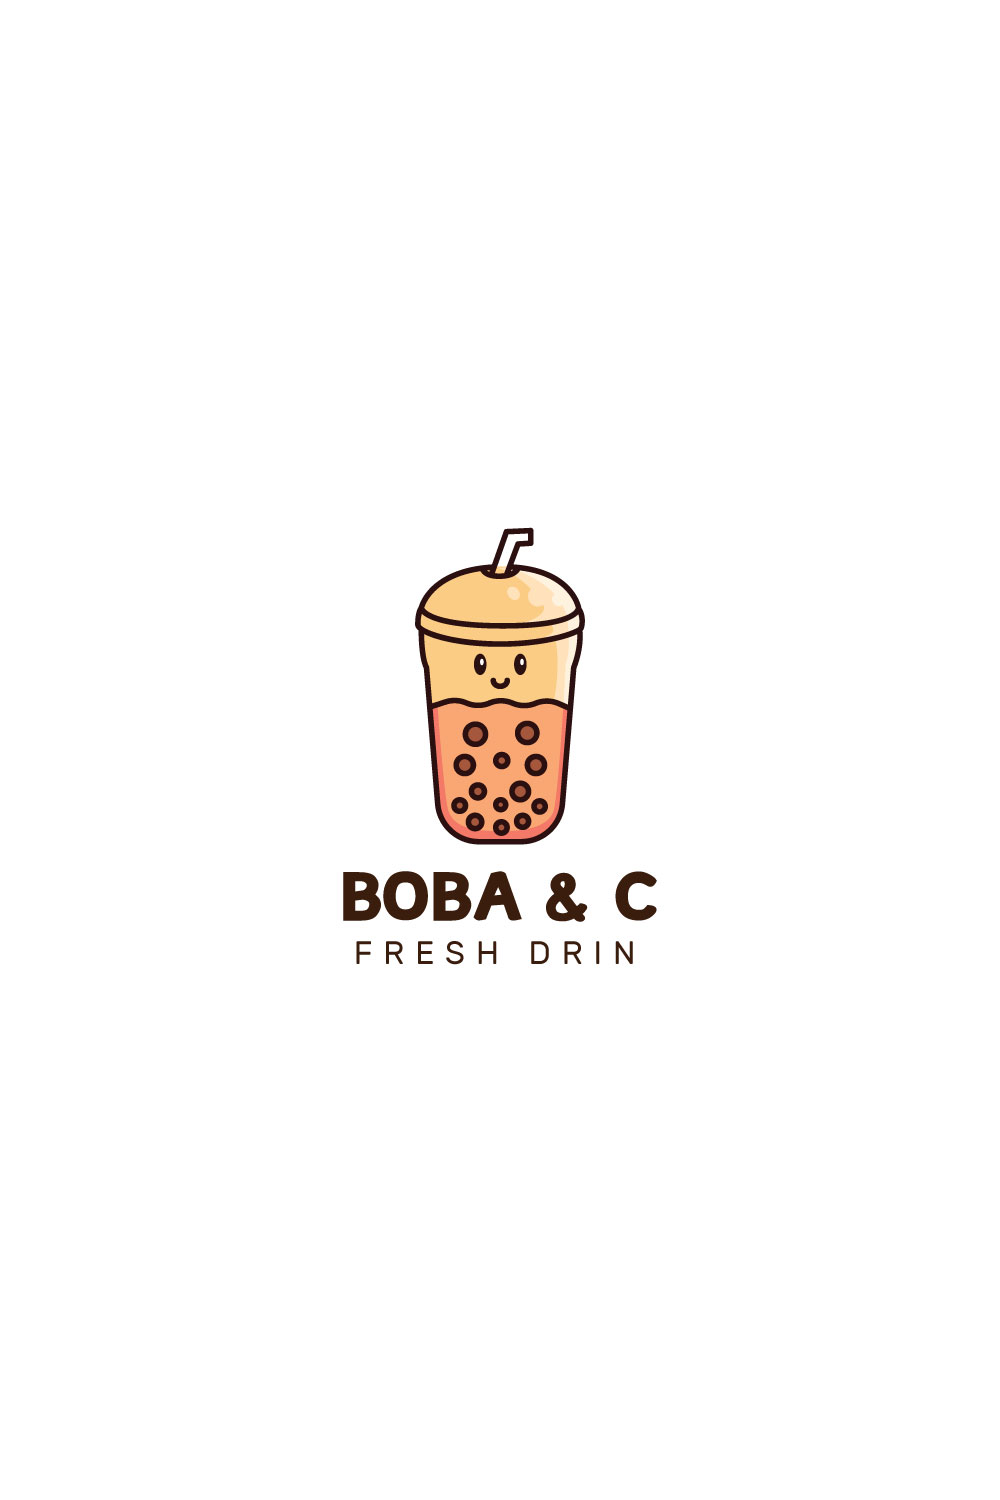 Brown Fun illustrated Bubble Tea Drink Logo pinterest preview image.